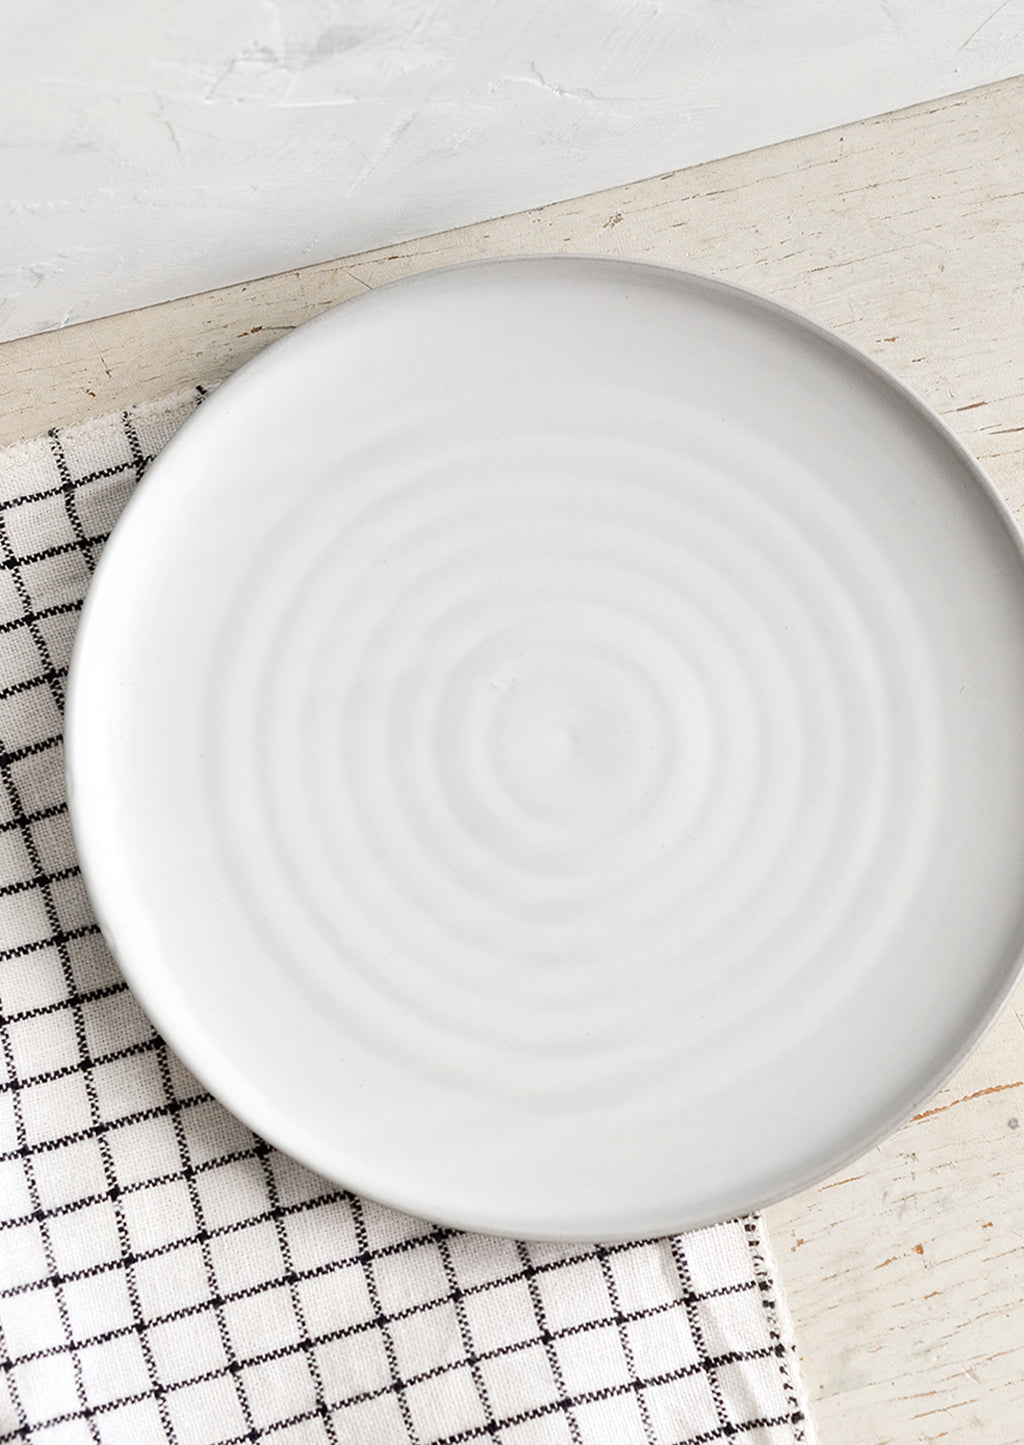 1: A round side plate with concentric circles pattern in soft grey glaze.